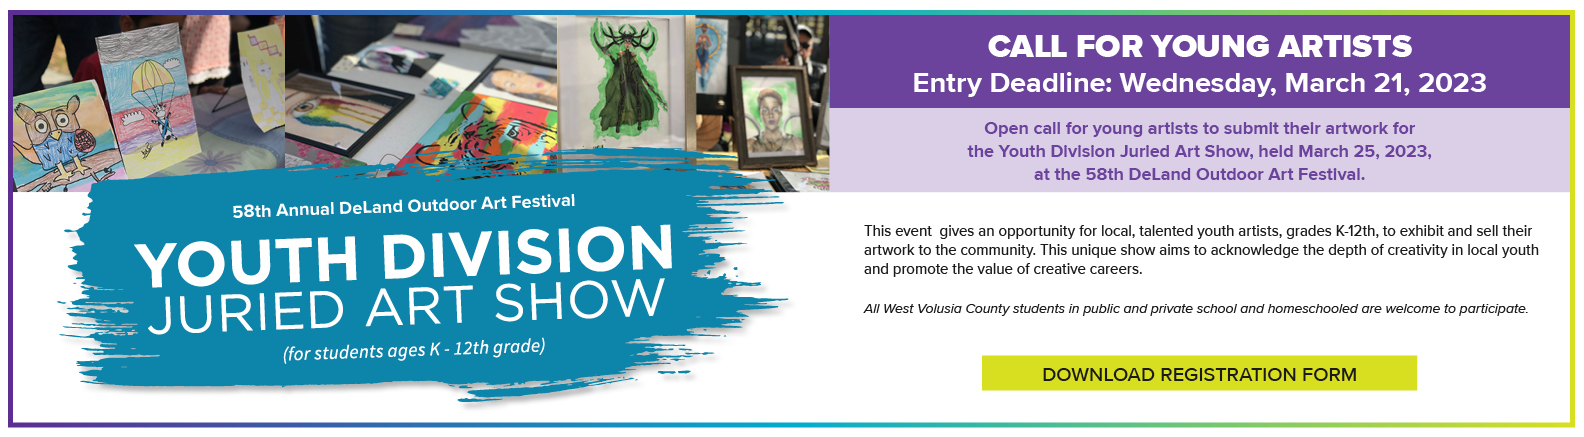 Youth Division Juried Art Show